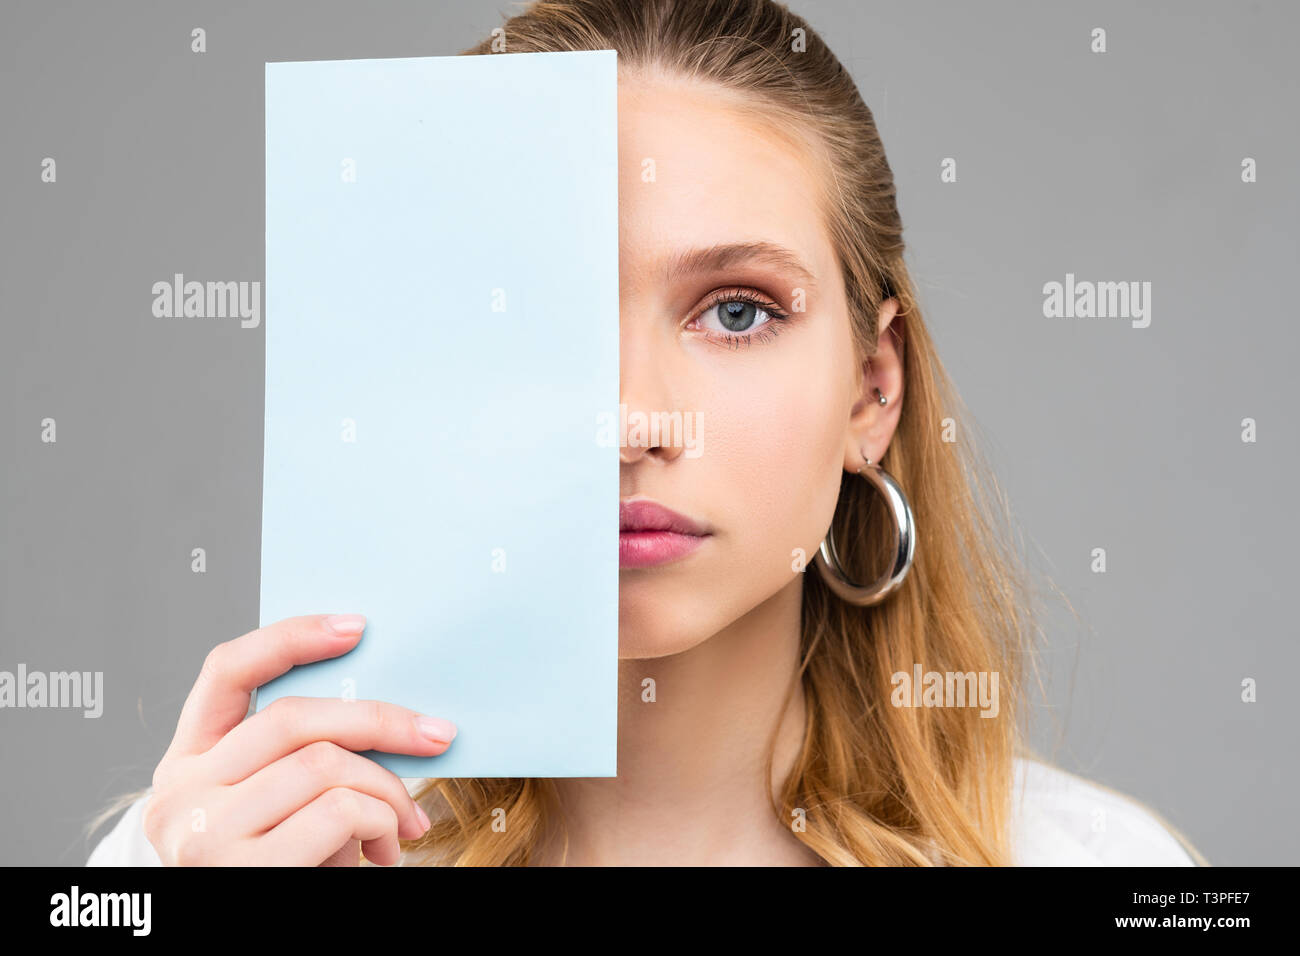 Flawless adult woman with thick earrings and light hair closing part of her face Stock Photo